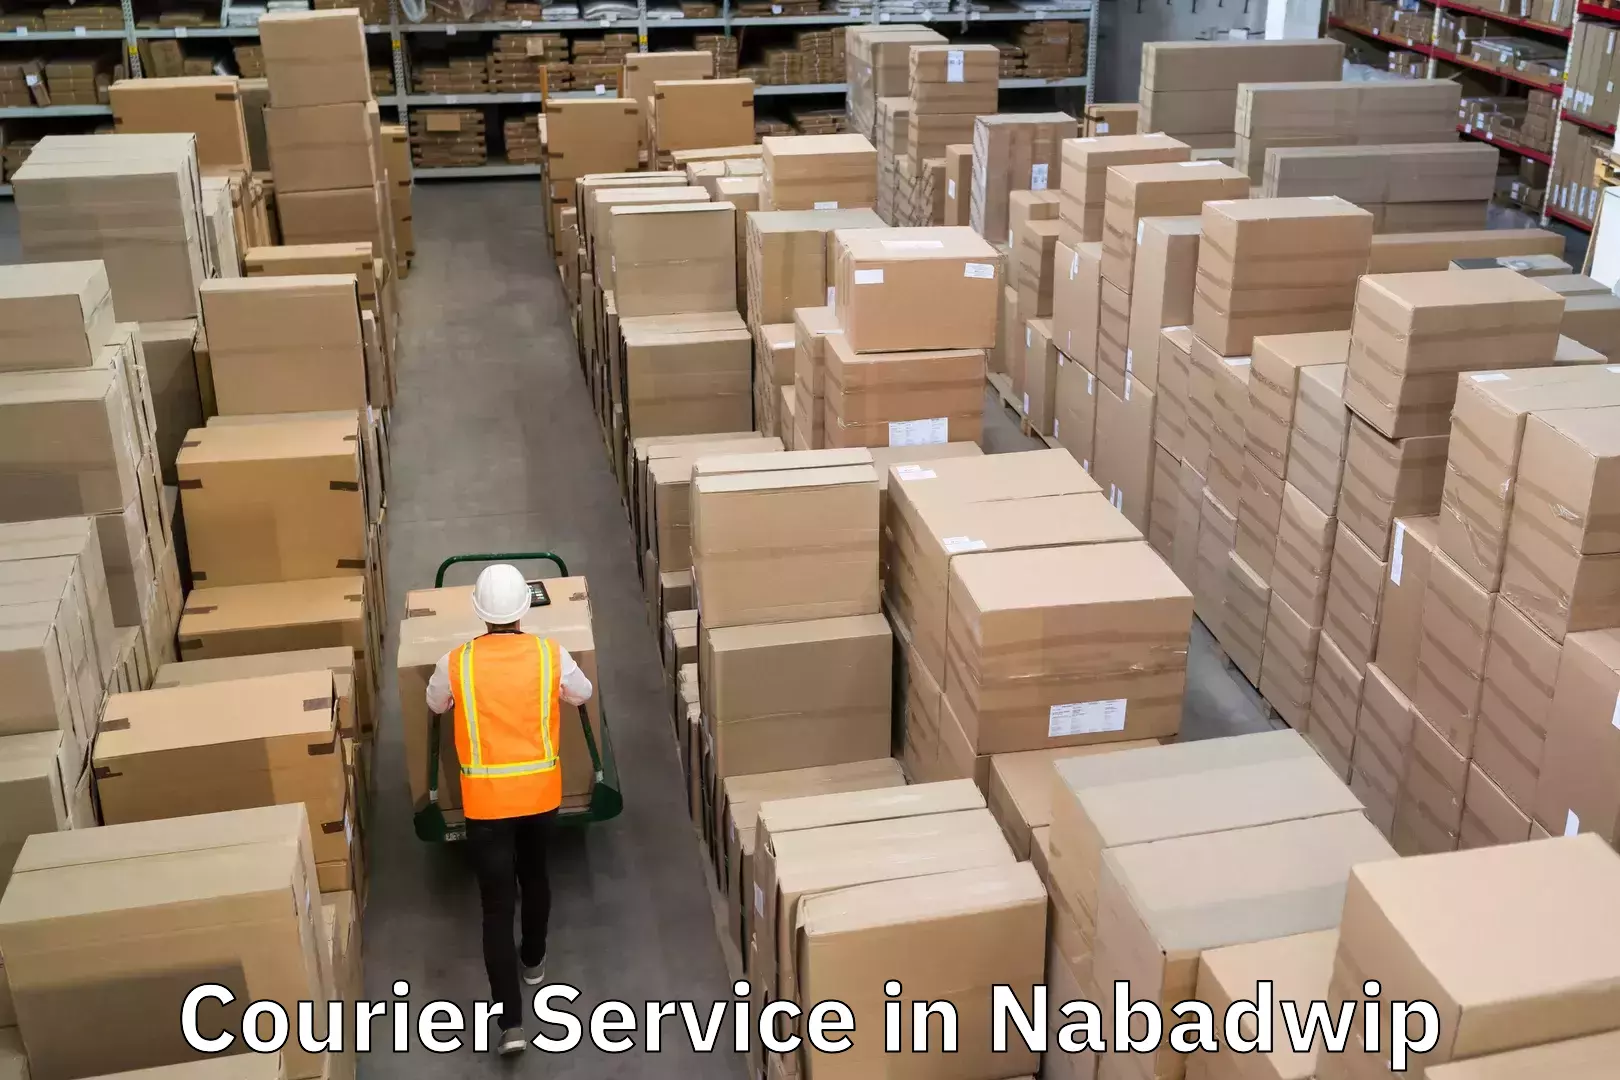 Flexible delivery scheduling in Nabadwip